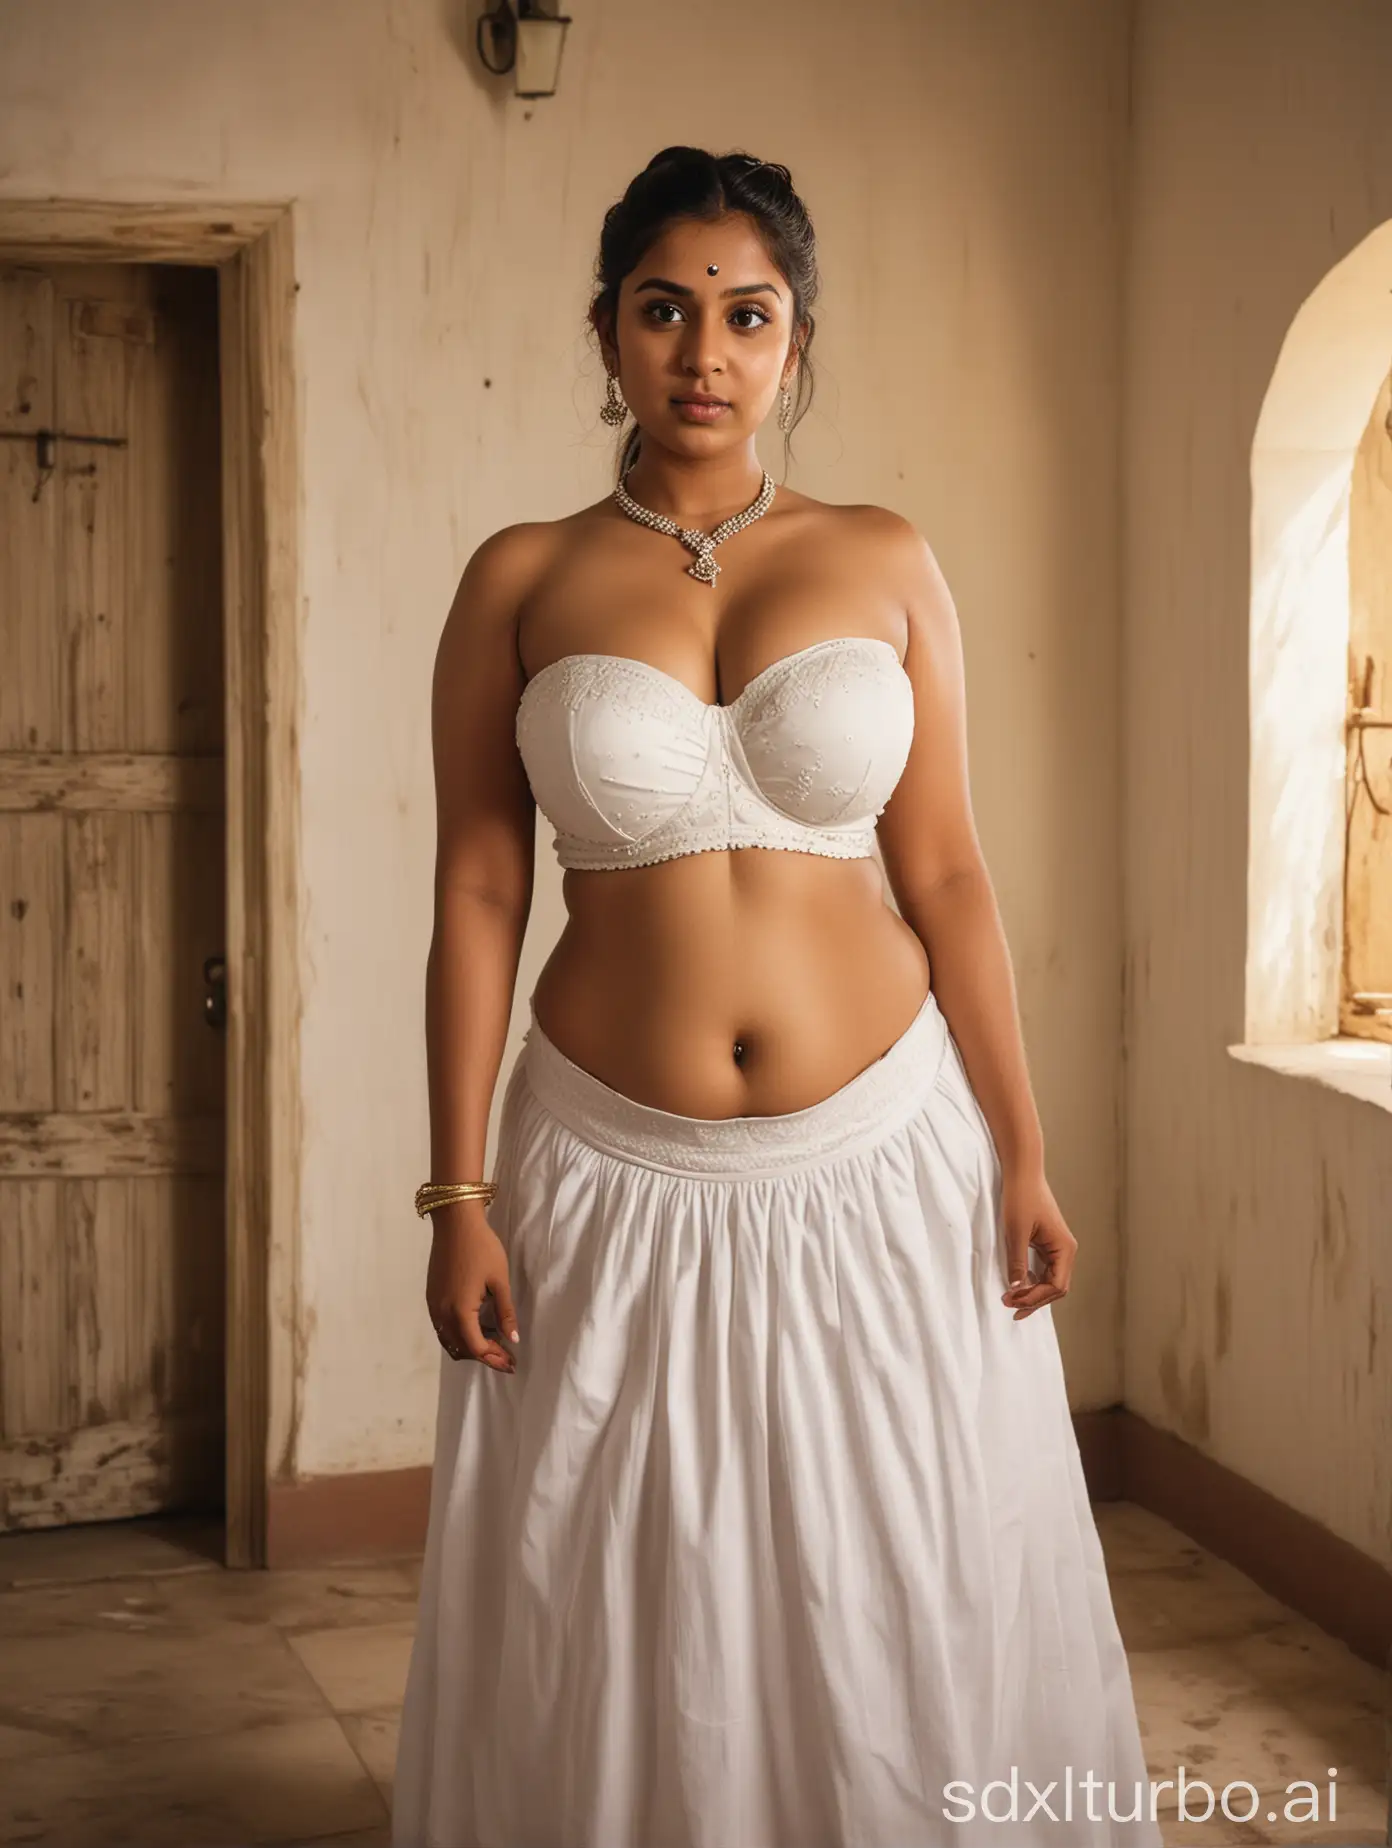 CURVY indian church bride with enormous breasts with flat belly, with Plump female body and hair bun, with white strapless bra with deep v cleavages and low waisted white skirt (skirt is under the belly button). She has a busty body, is standing at the well lit and bright lighting house. Blurred background, ultra focus, face illuminated, 16k resolution. Side pose